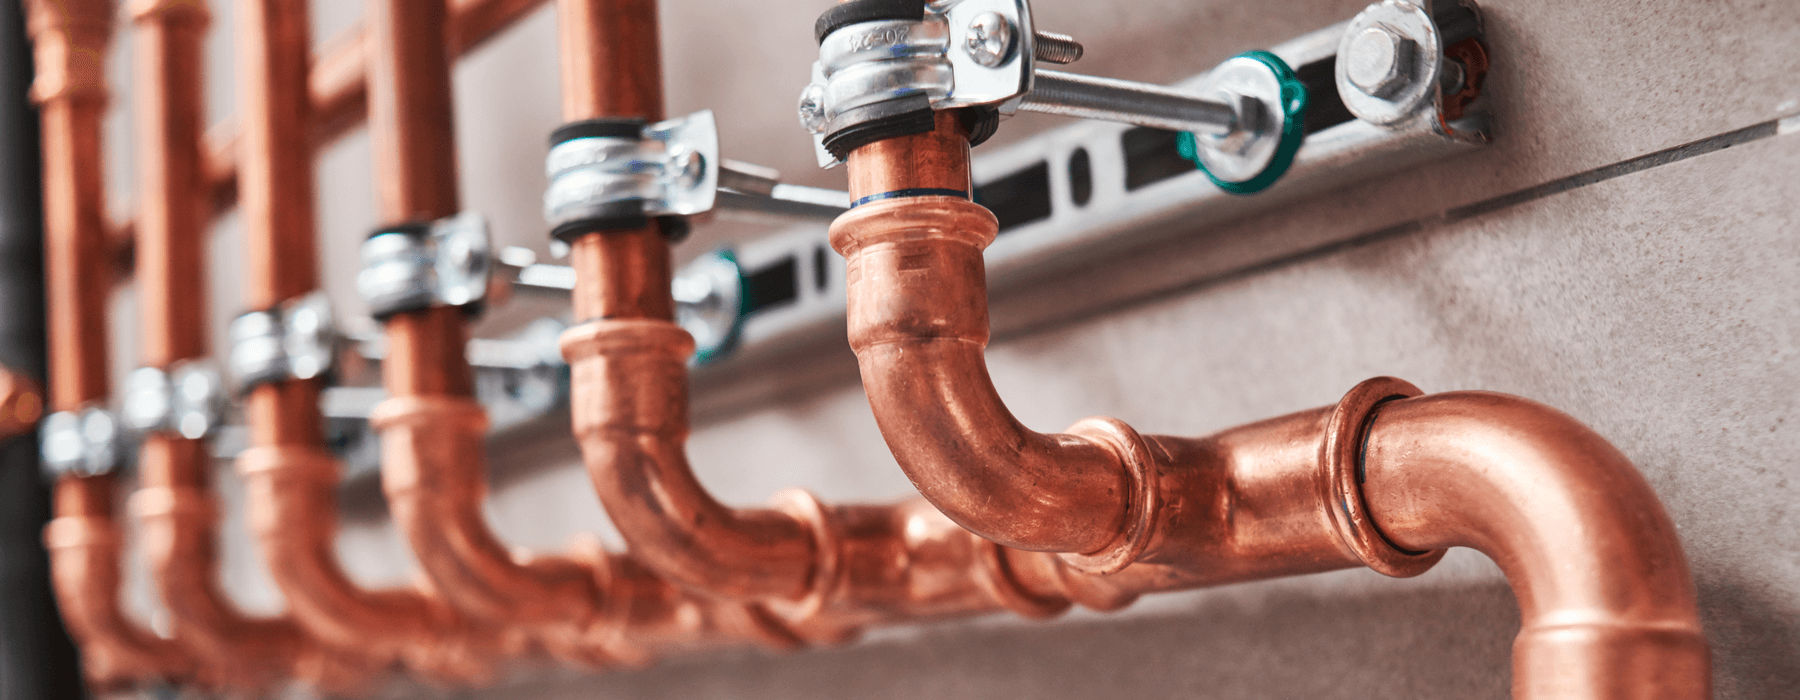 How a Professional Plumbing Design Improves Energy Efficiency